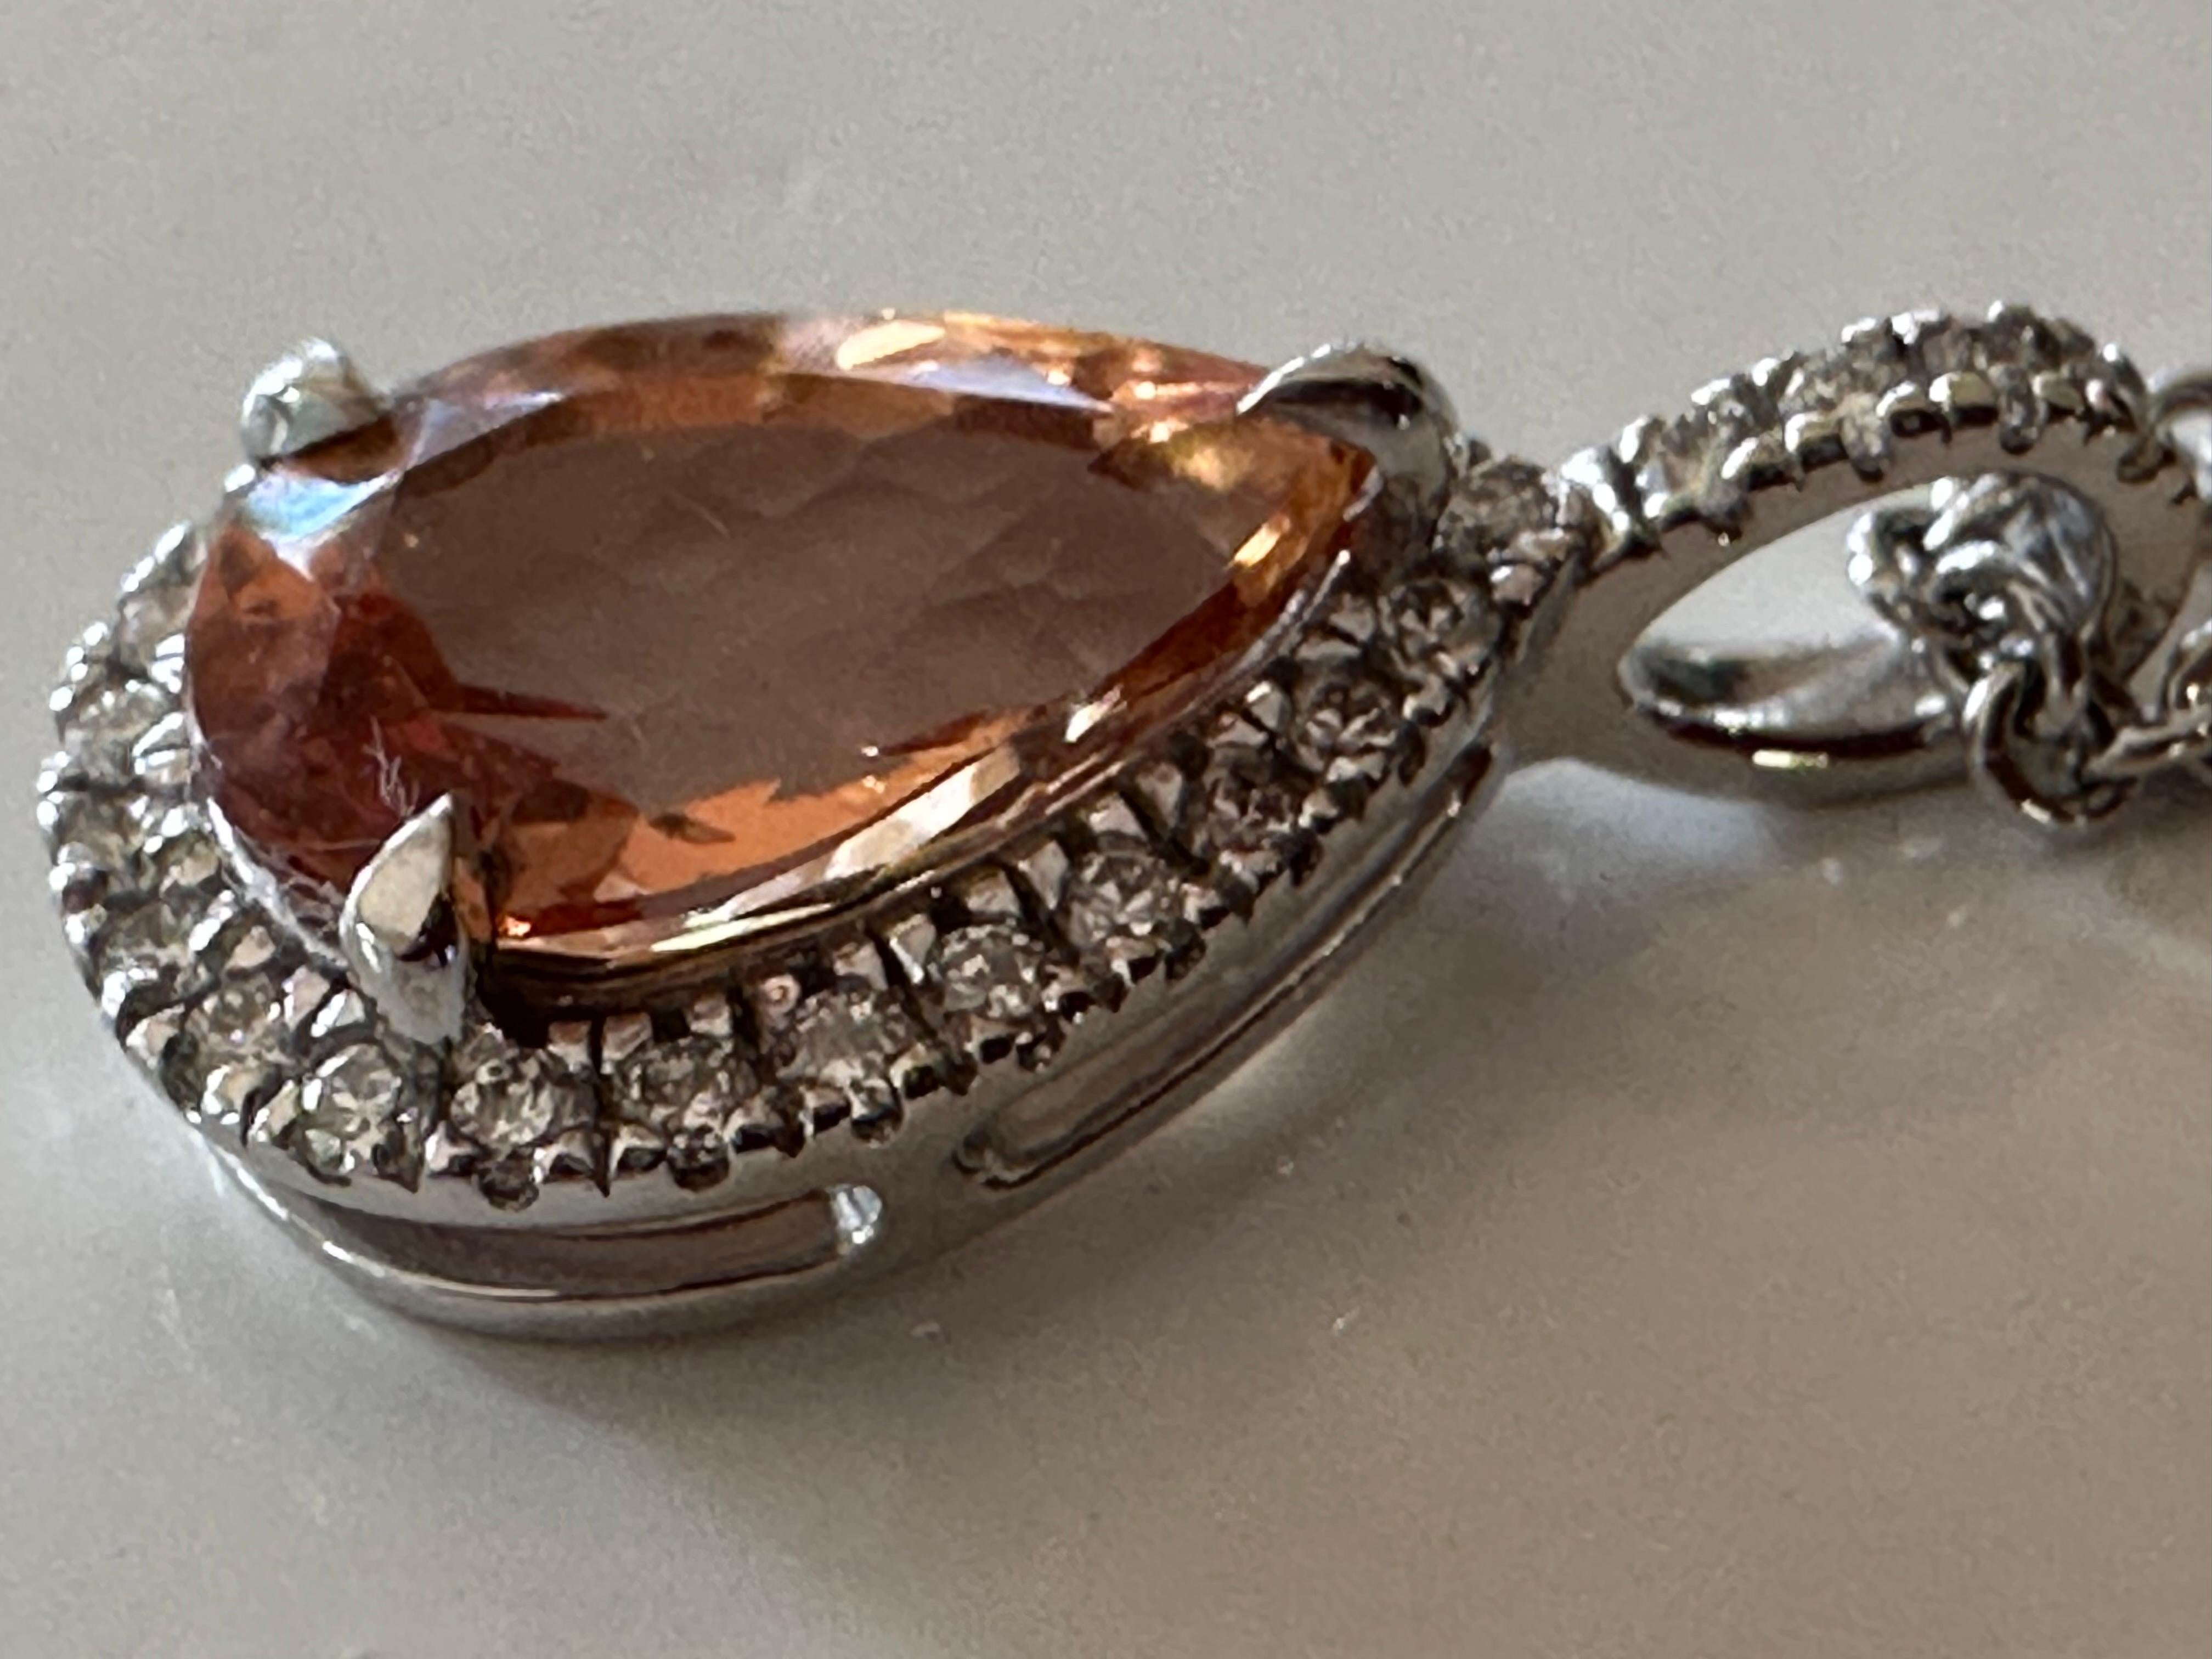 Handcrafted in 14K white gold, this exquisite pendant necklace features a 2.94-carat pear-shaped orange topaz surrounded by a halo of twenty-eight round diamonds, G color, SI1 clarity totaling 0.24 carats. 
